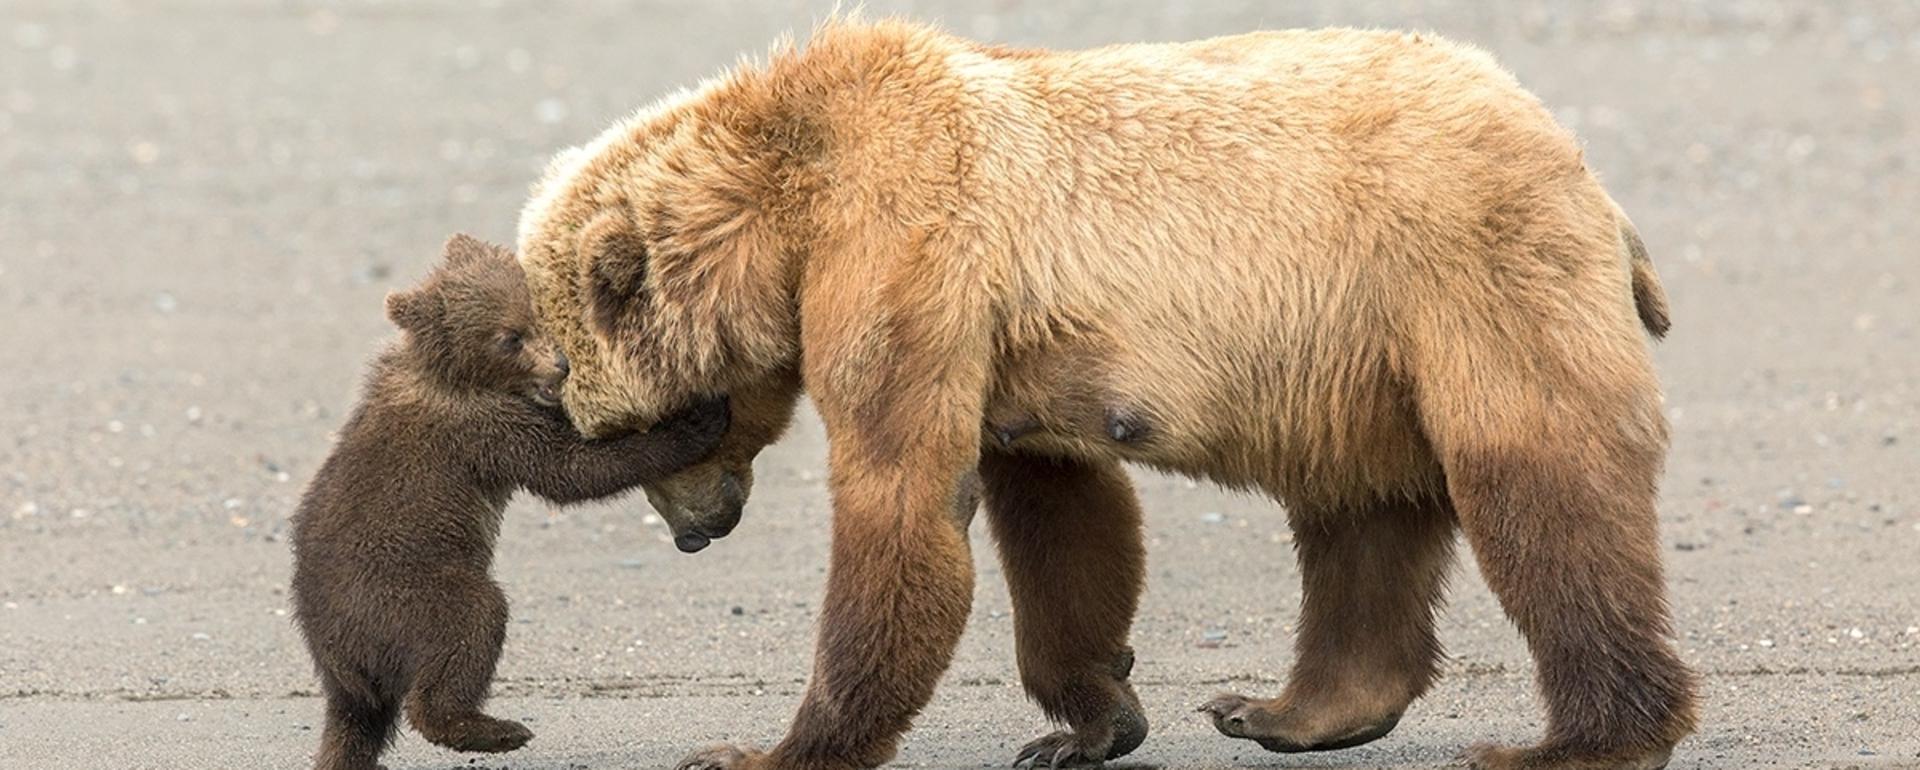 Ashleigh Scully's photo of brown bears